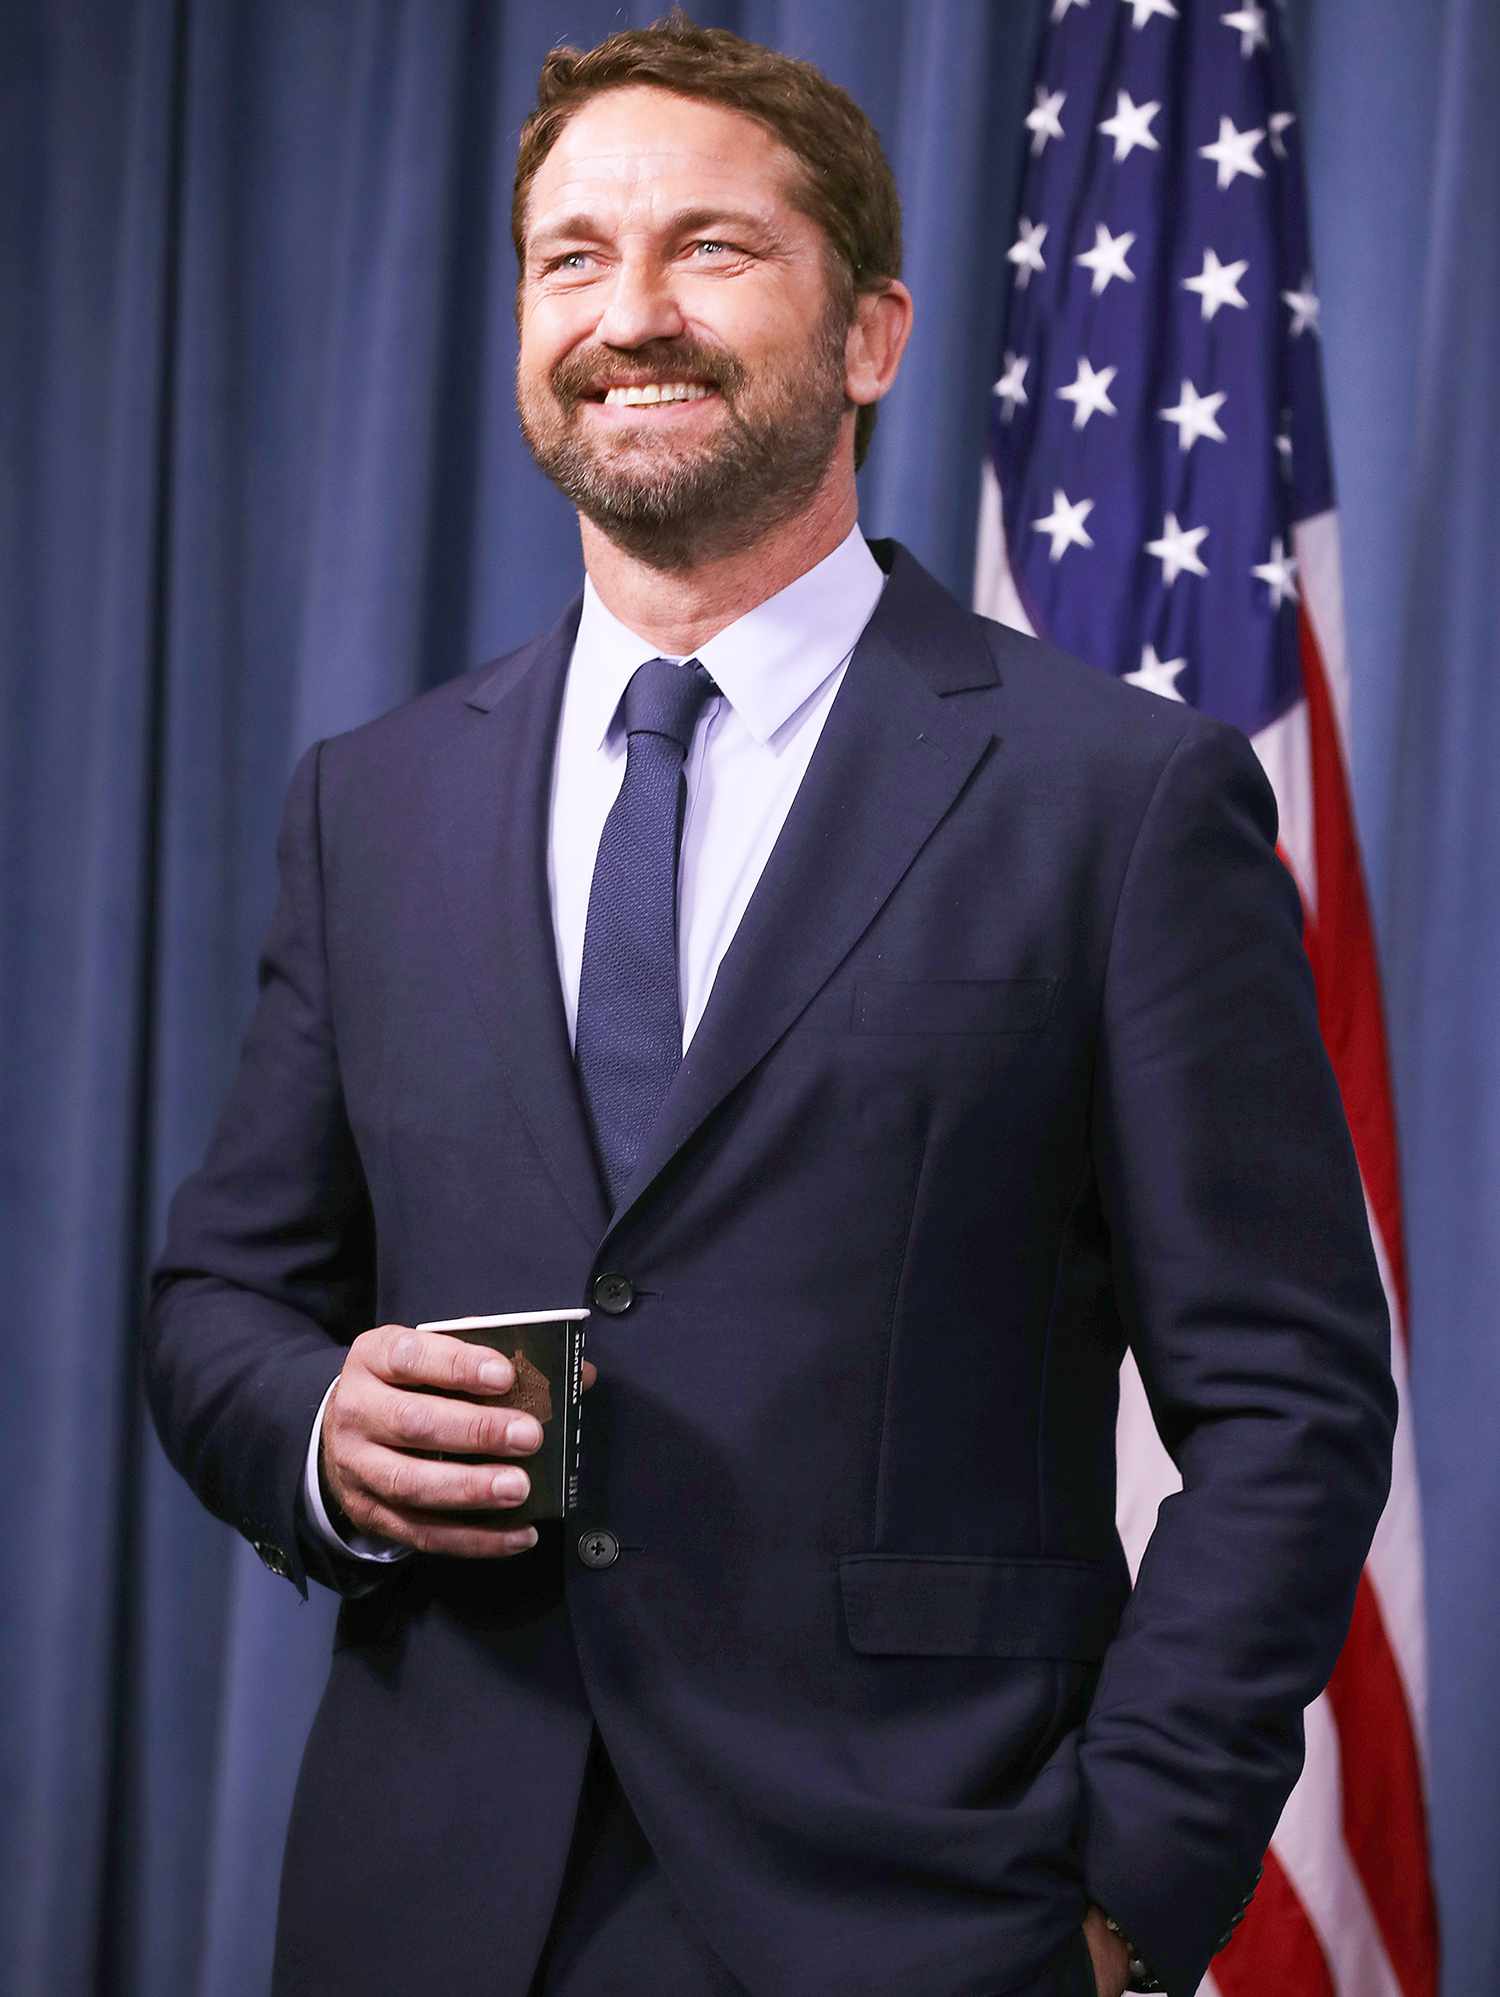 Actor Gerard Butler Discusses His New Film About Navy Attack Submarine Crew At The Pentagon